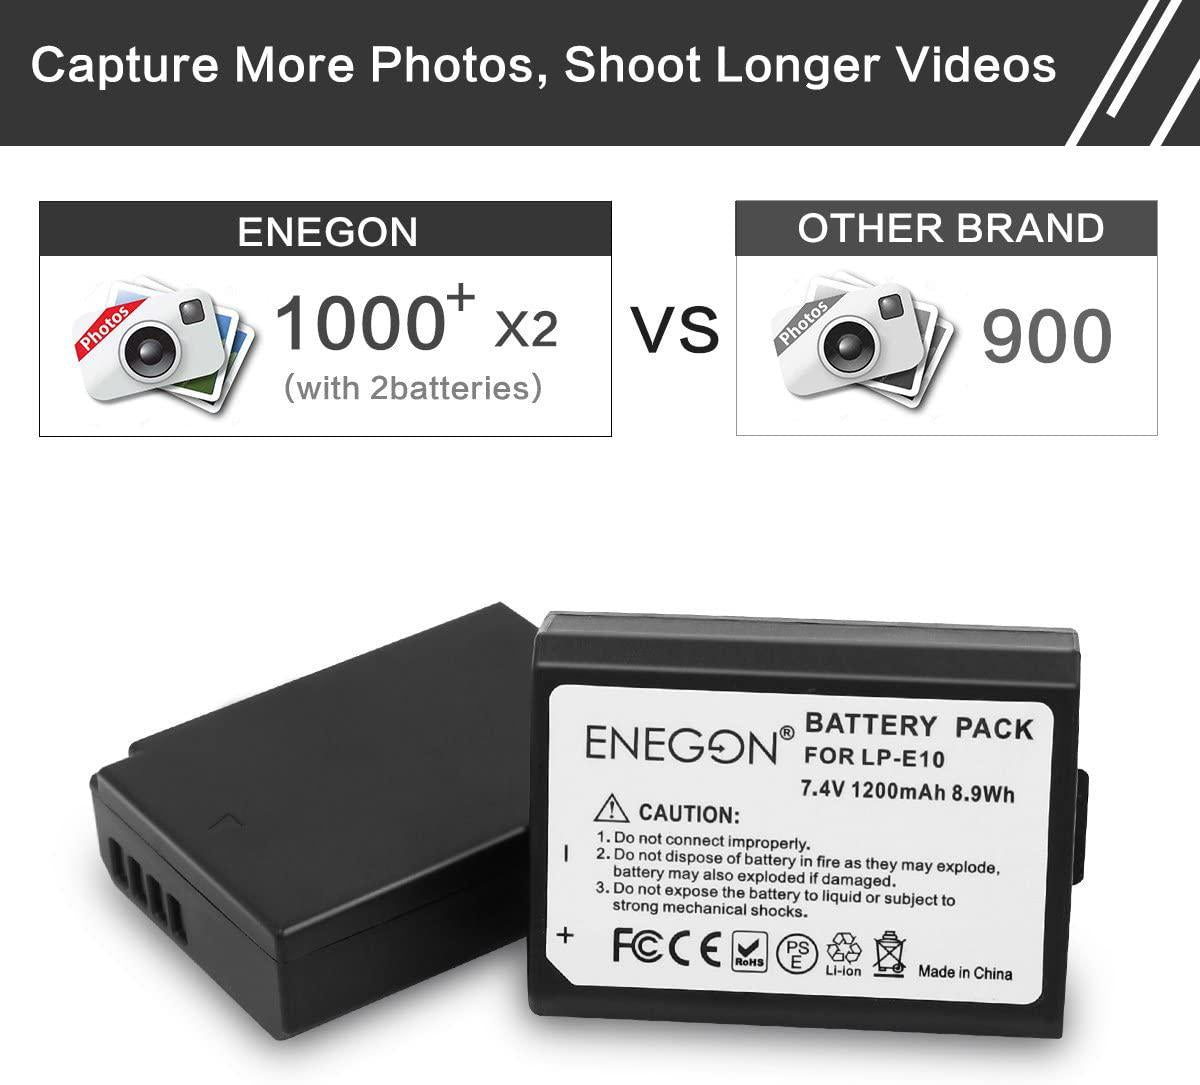 ENEGON, ENEGON LP-E10 Battery And Charger Set 1200mAh (2-Pack), Compatible with Canon LP-E10 and Canon EOS Rebel T3, T5, T6, T7,Kiss X50, Kiss X70, EOS 1100D, EOS 1200D, EOS 1300(100% Compatible with Original)